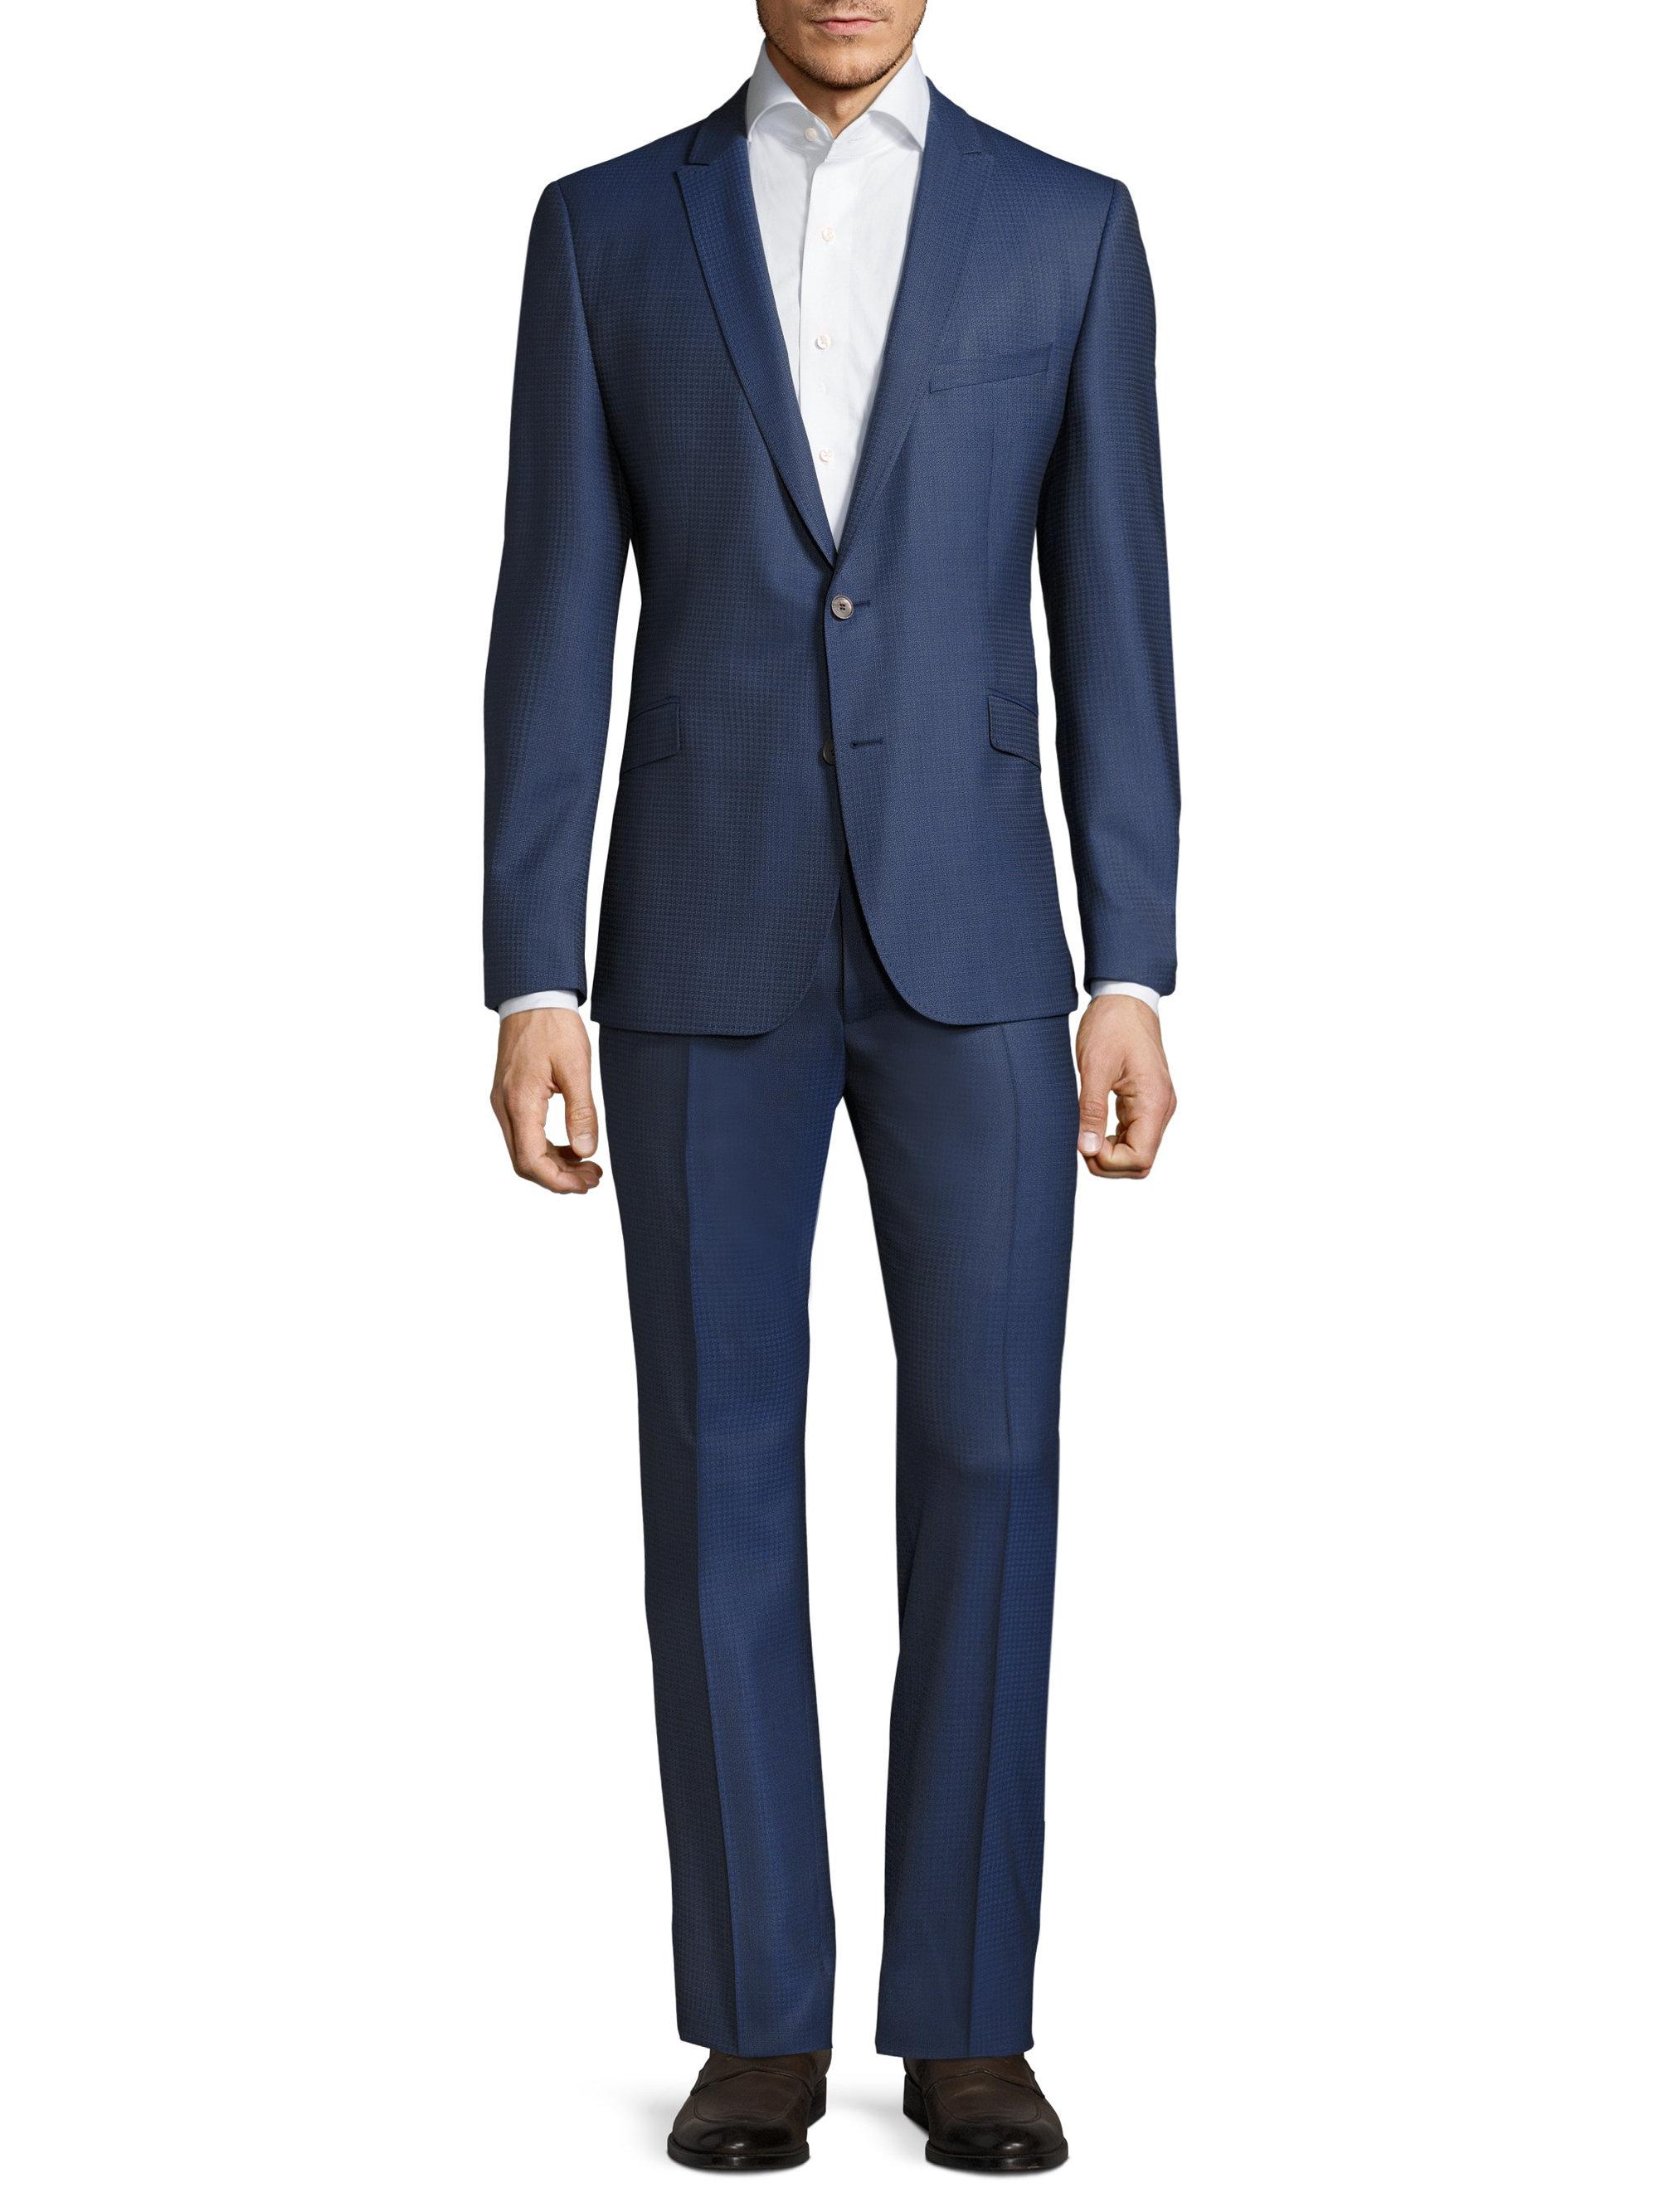 Lyst - Strellson Houndstooth Two-button Suit in Blue for Men